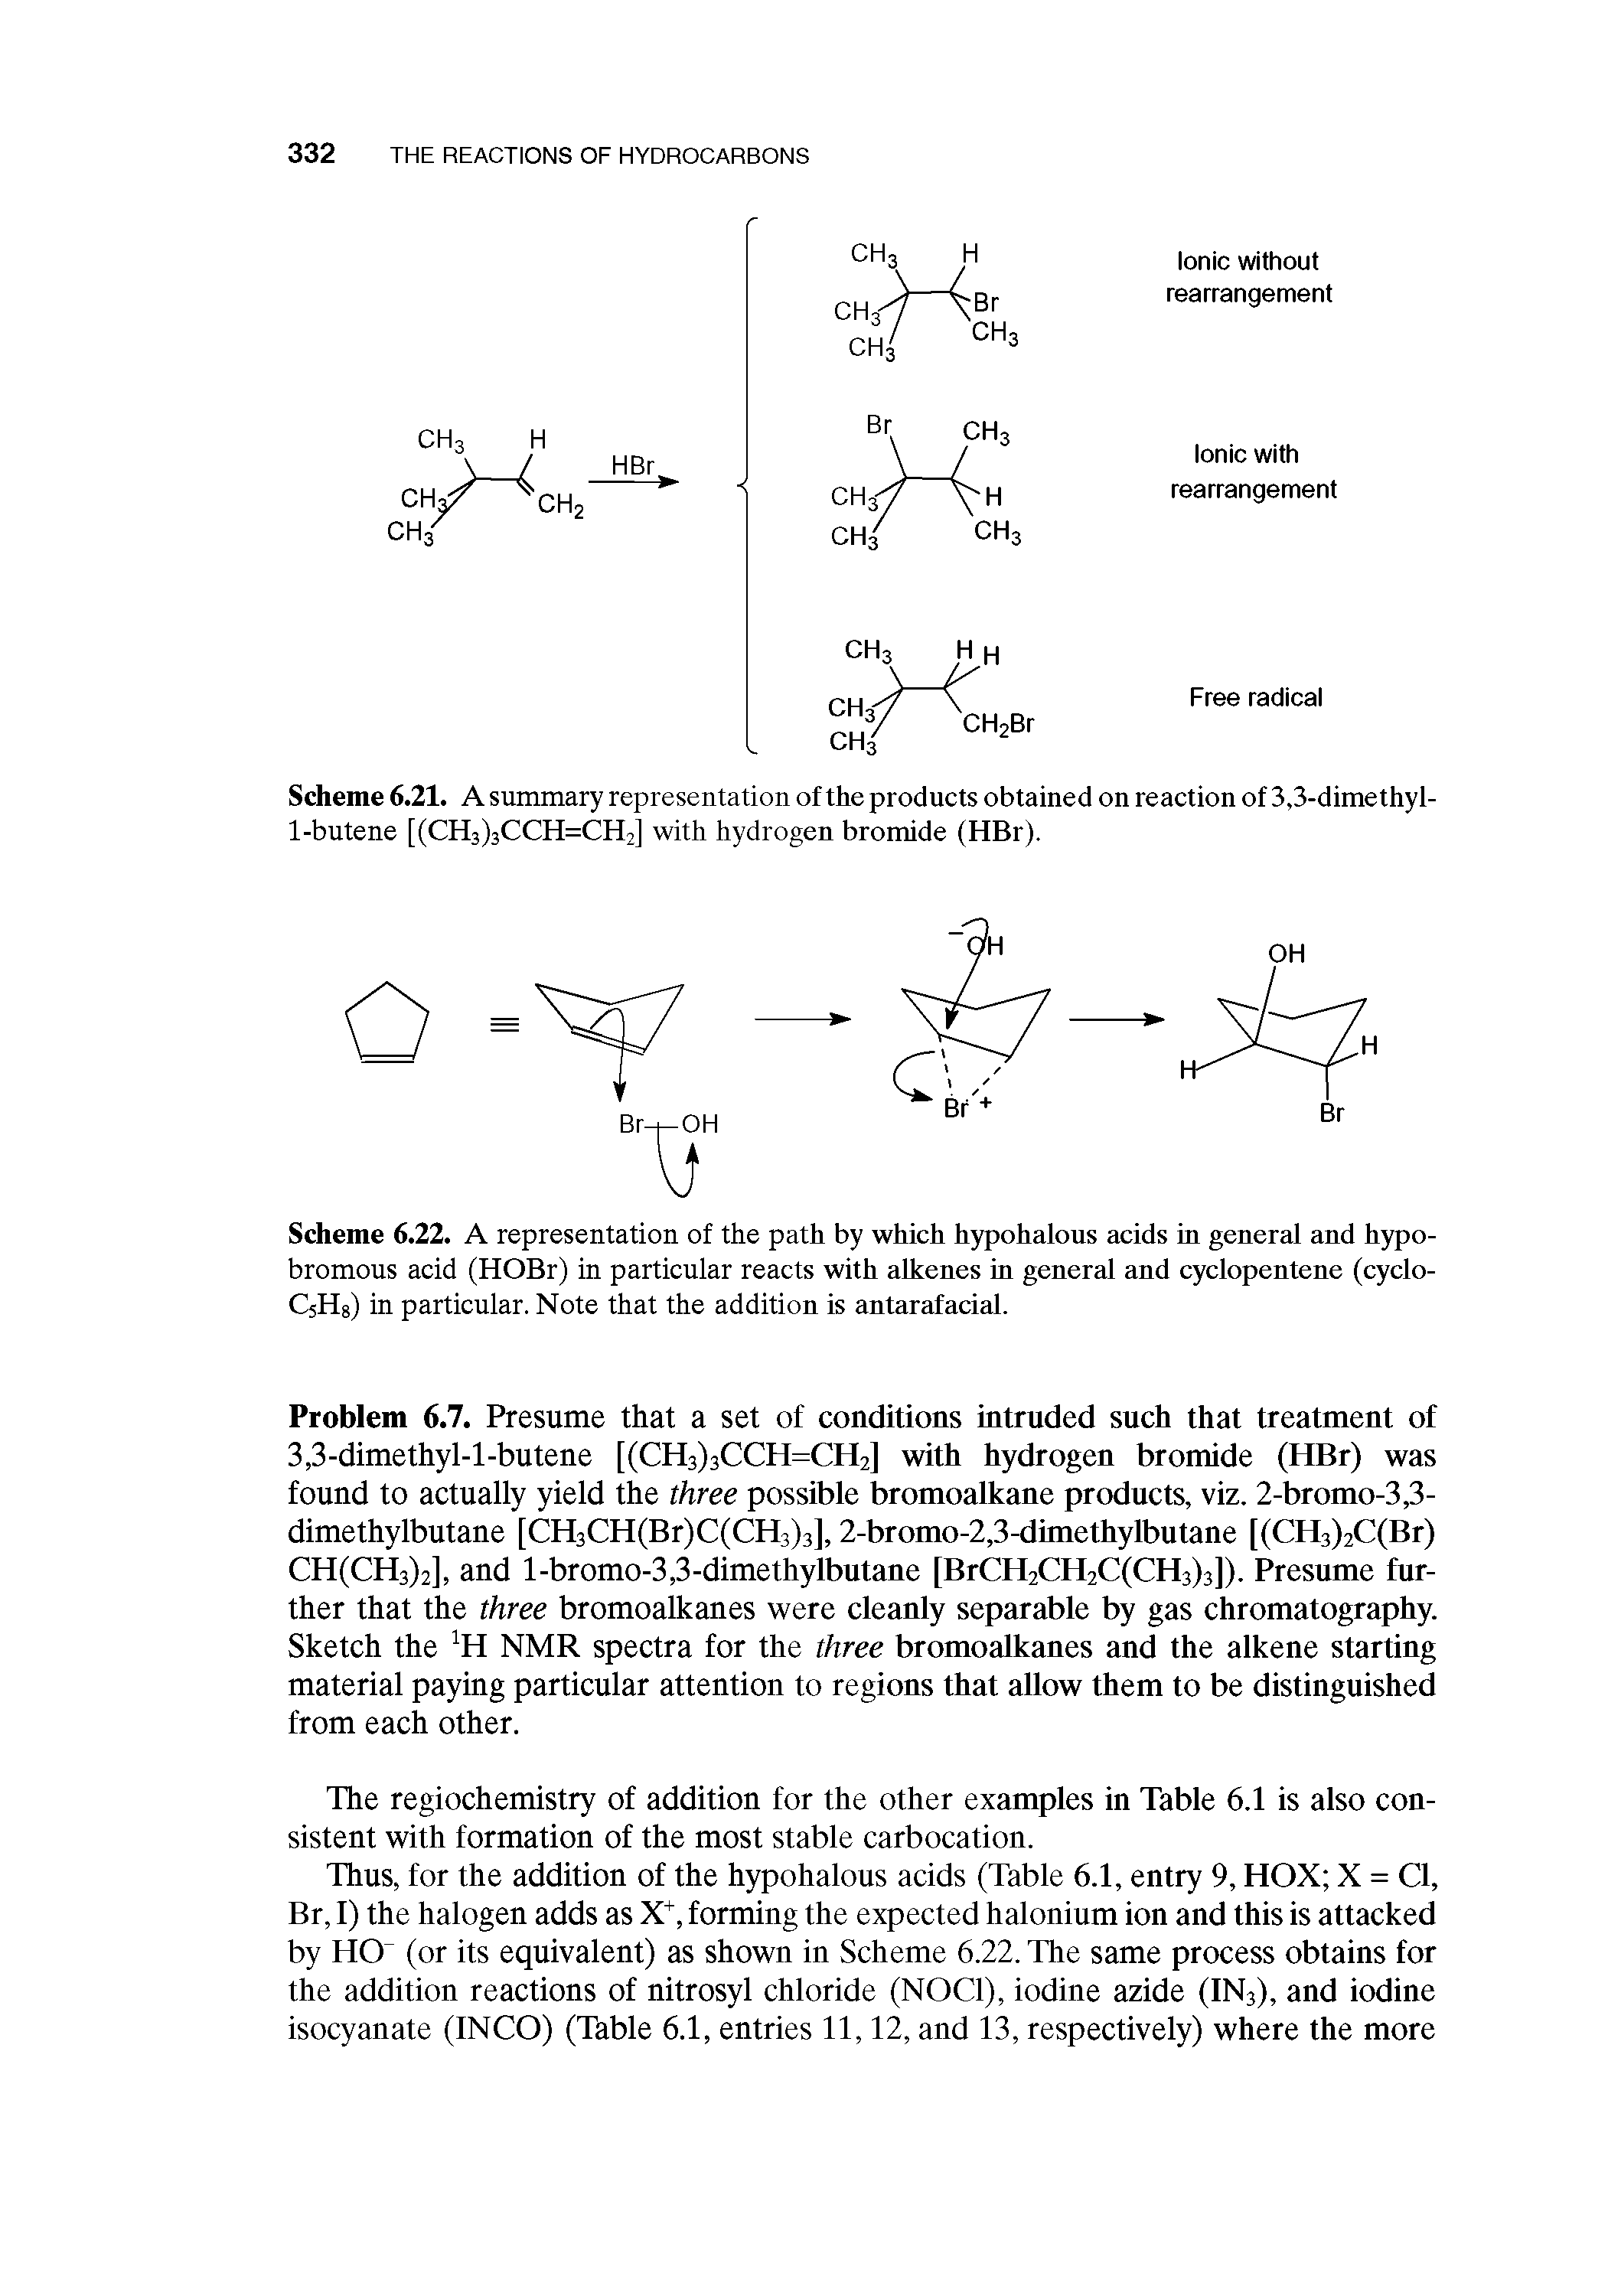 Scheme 6.22. A representation of the path by which hypohalous acids in general and hypo-bromous acid (HOBr) in particular reacts with alkenes in general and cyclopentene (cyclo-CsHs) in particular. Note that the addition is antarafadal.